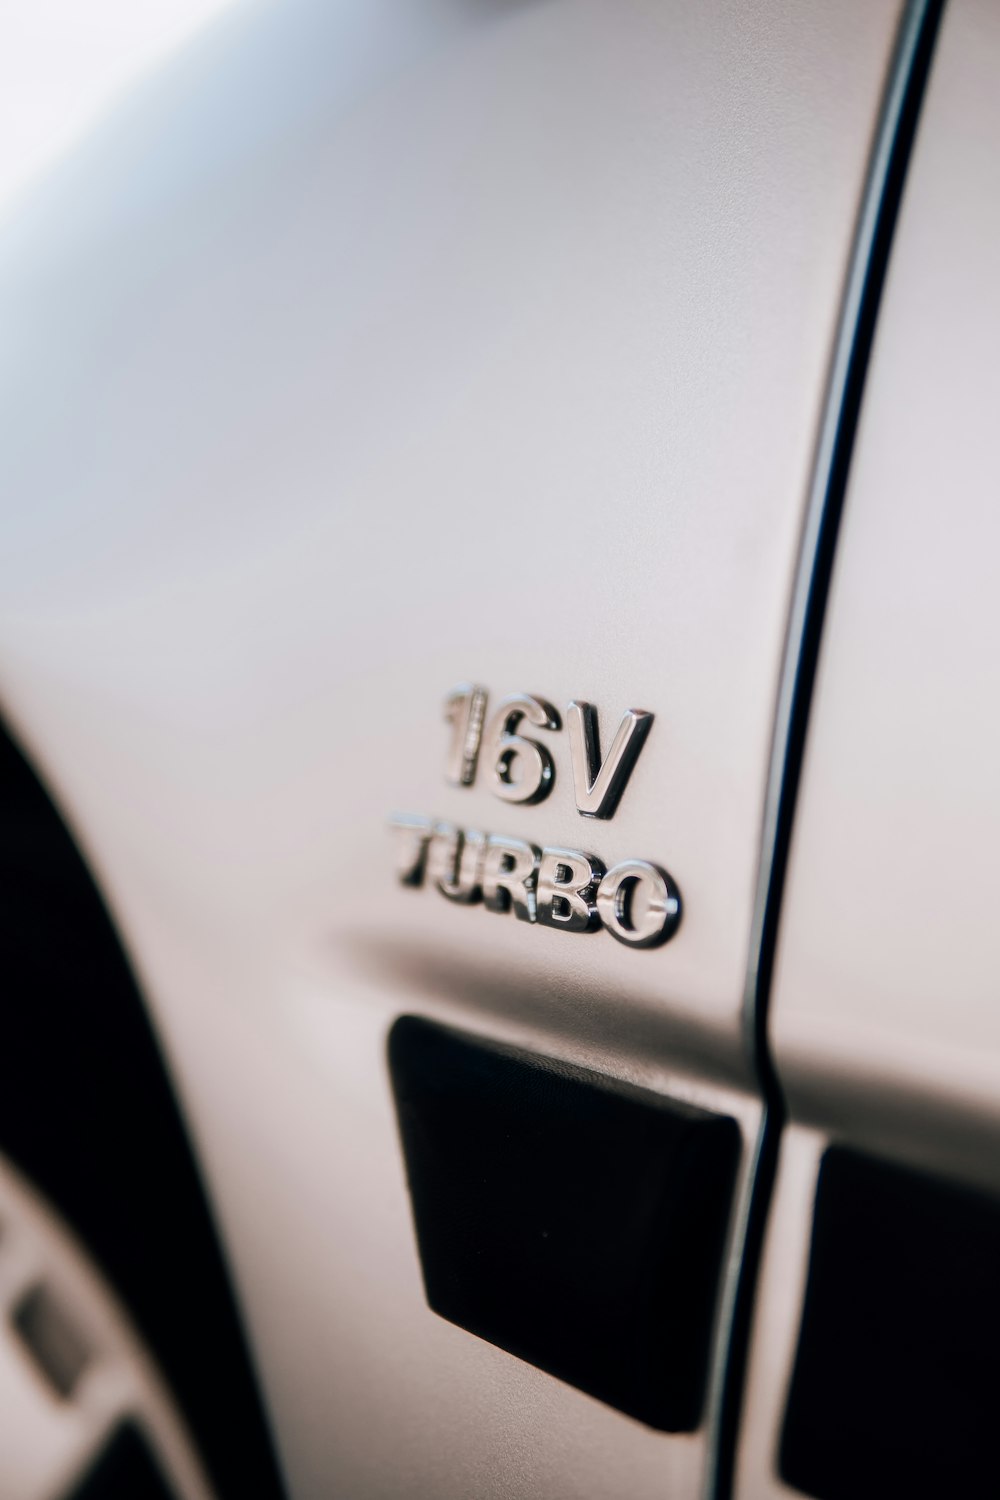 a close up of the emblem on a white car